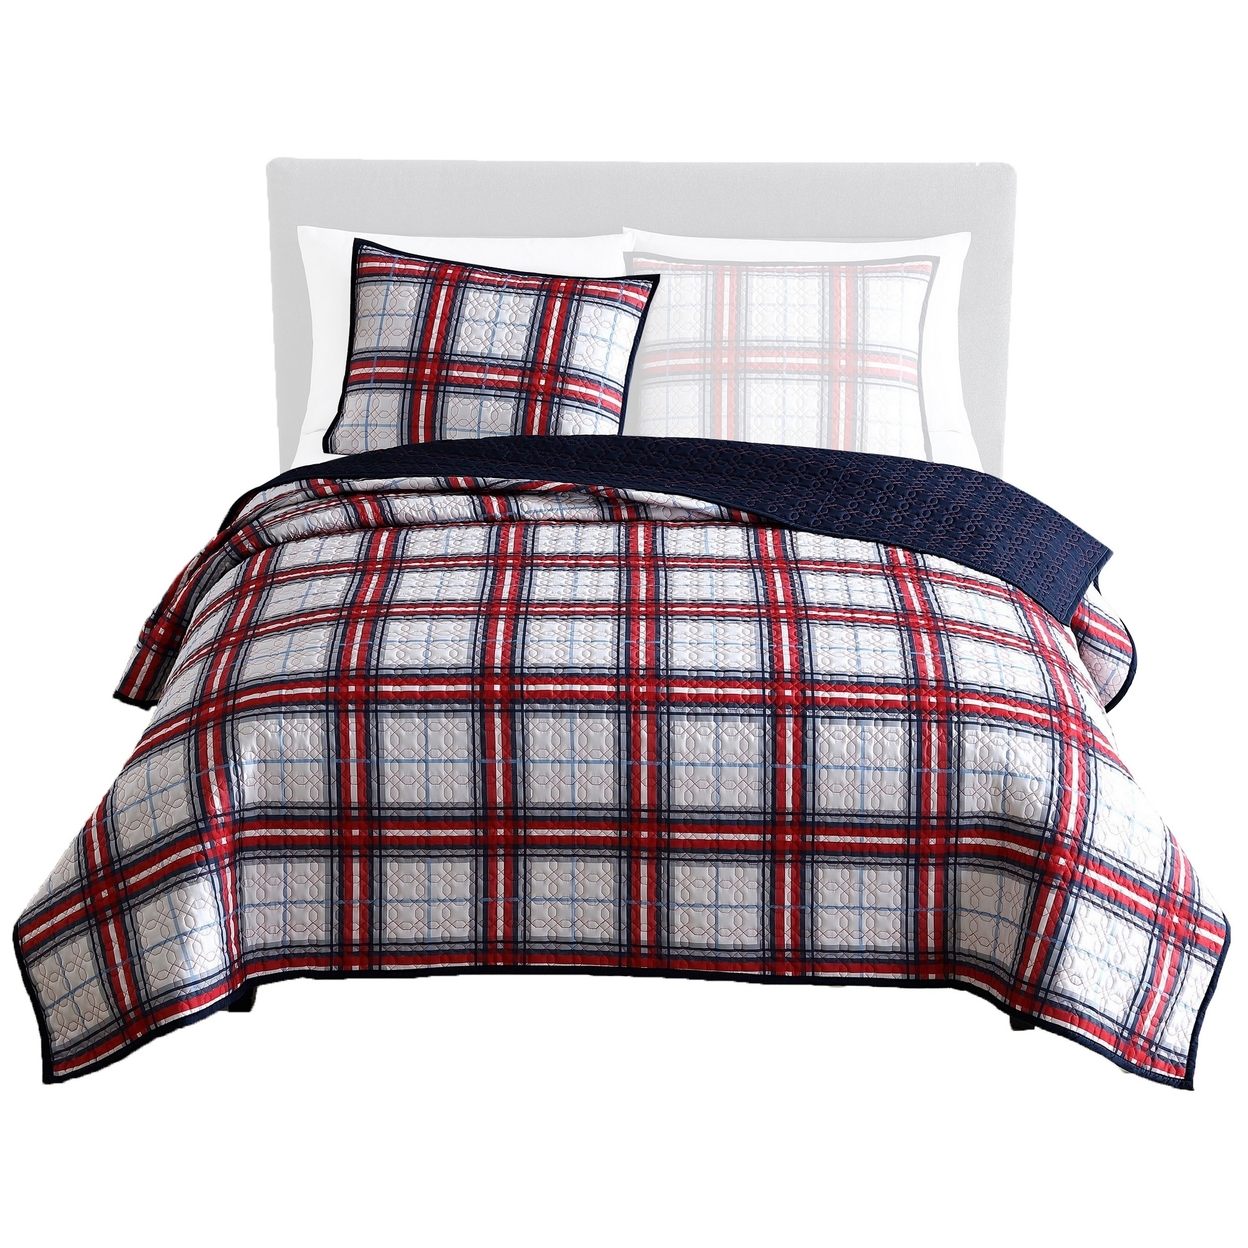 Ivy 2 Piece Twin Size Plaid Coverlet With Matching Sham, Red, White - Saltoro Sherpi